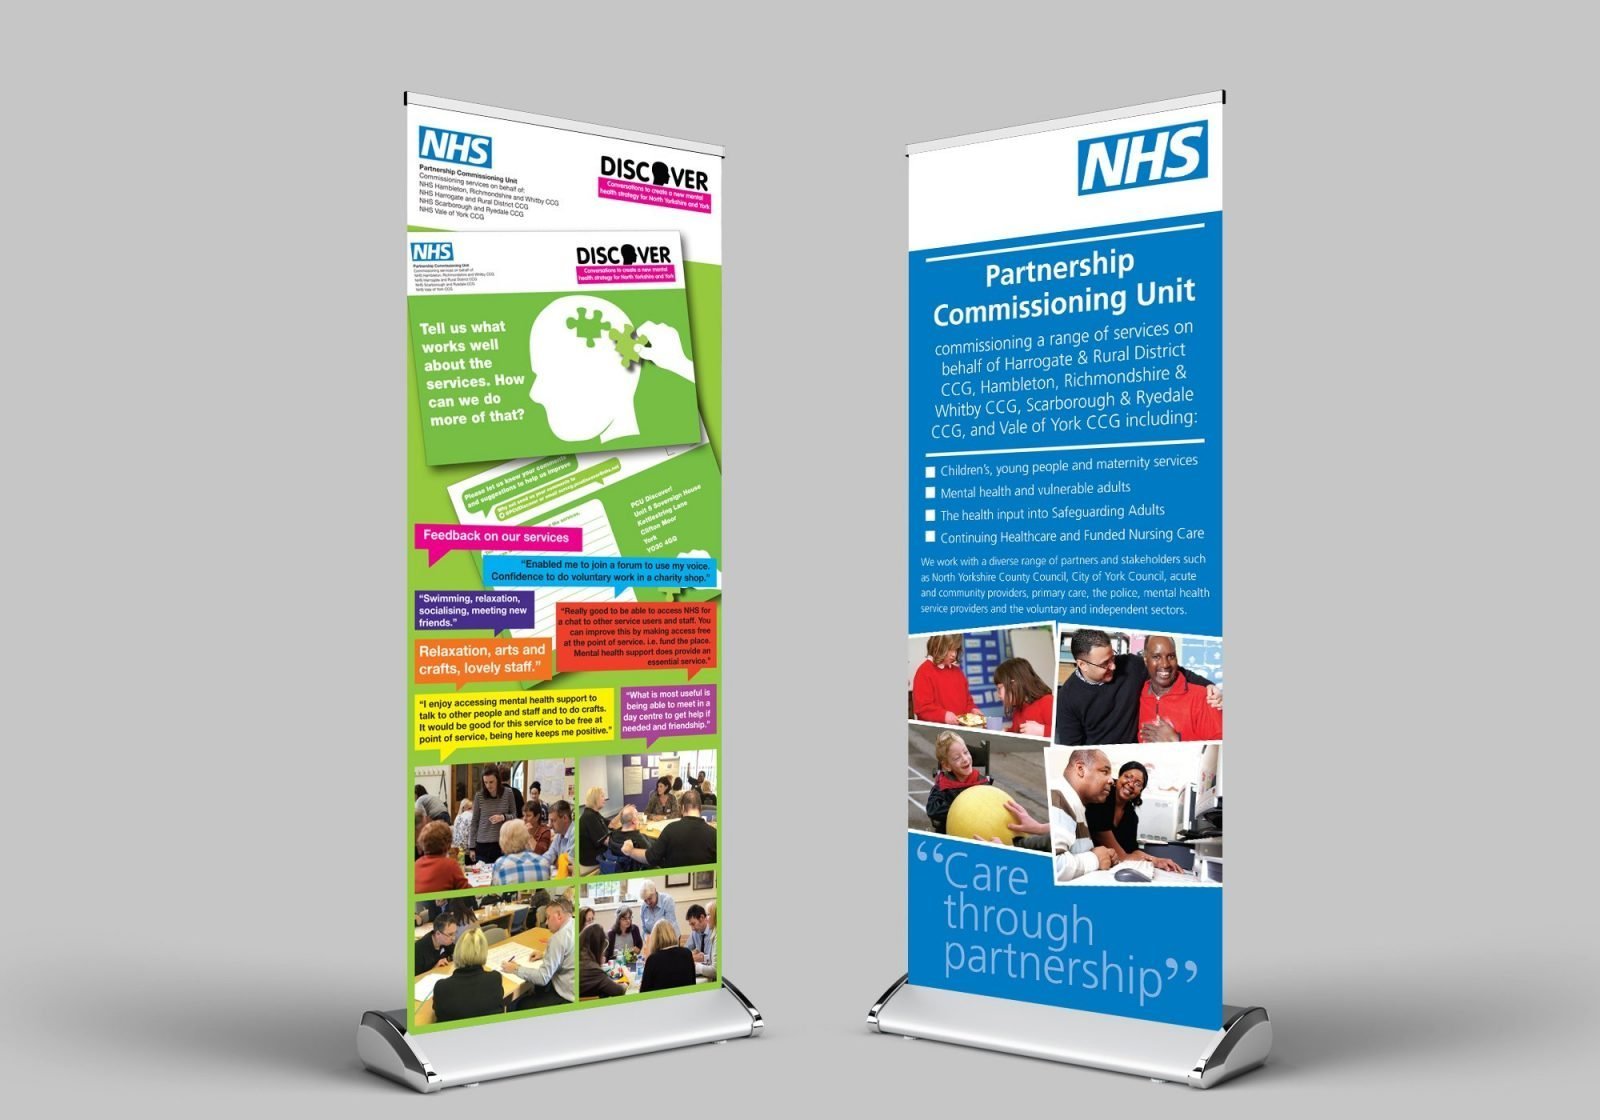 Two roller banner designs for the NHS Partnership Commissioning Unit